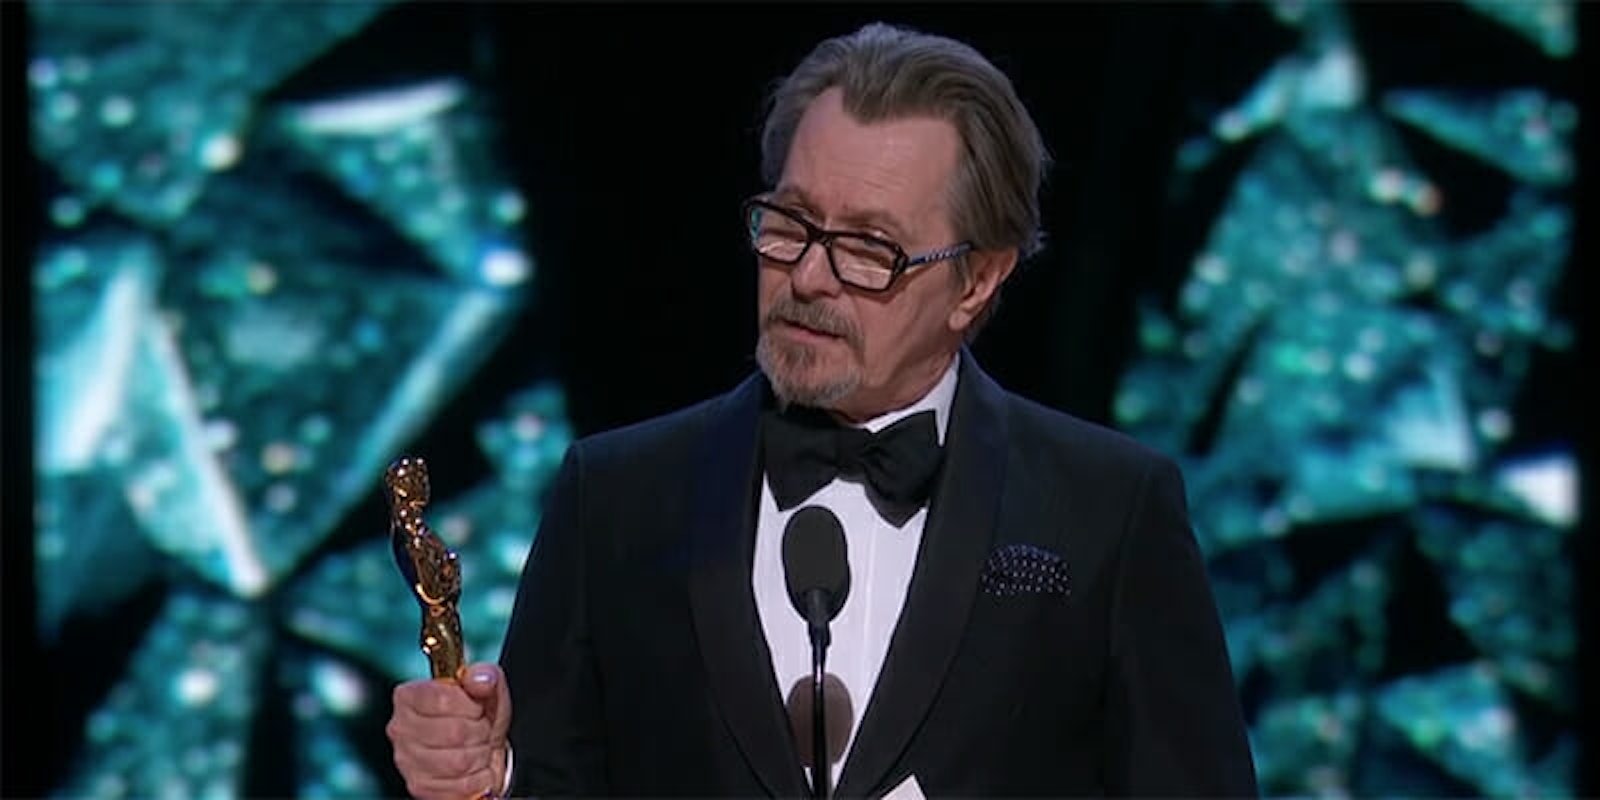 Gary Oldman's ex-wife is blasting for the Academy for his Oscar win in light of her accusations of domestic abuse.